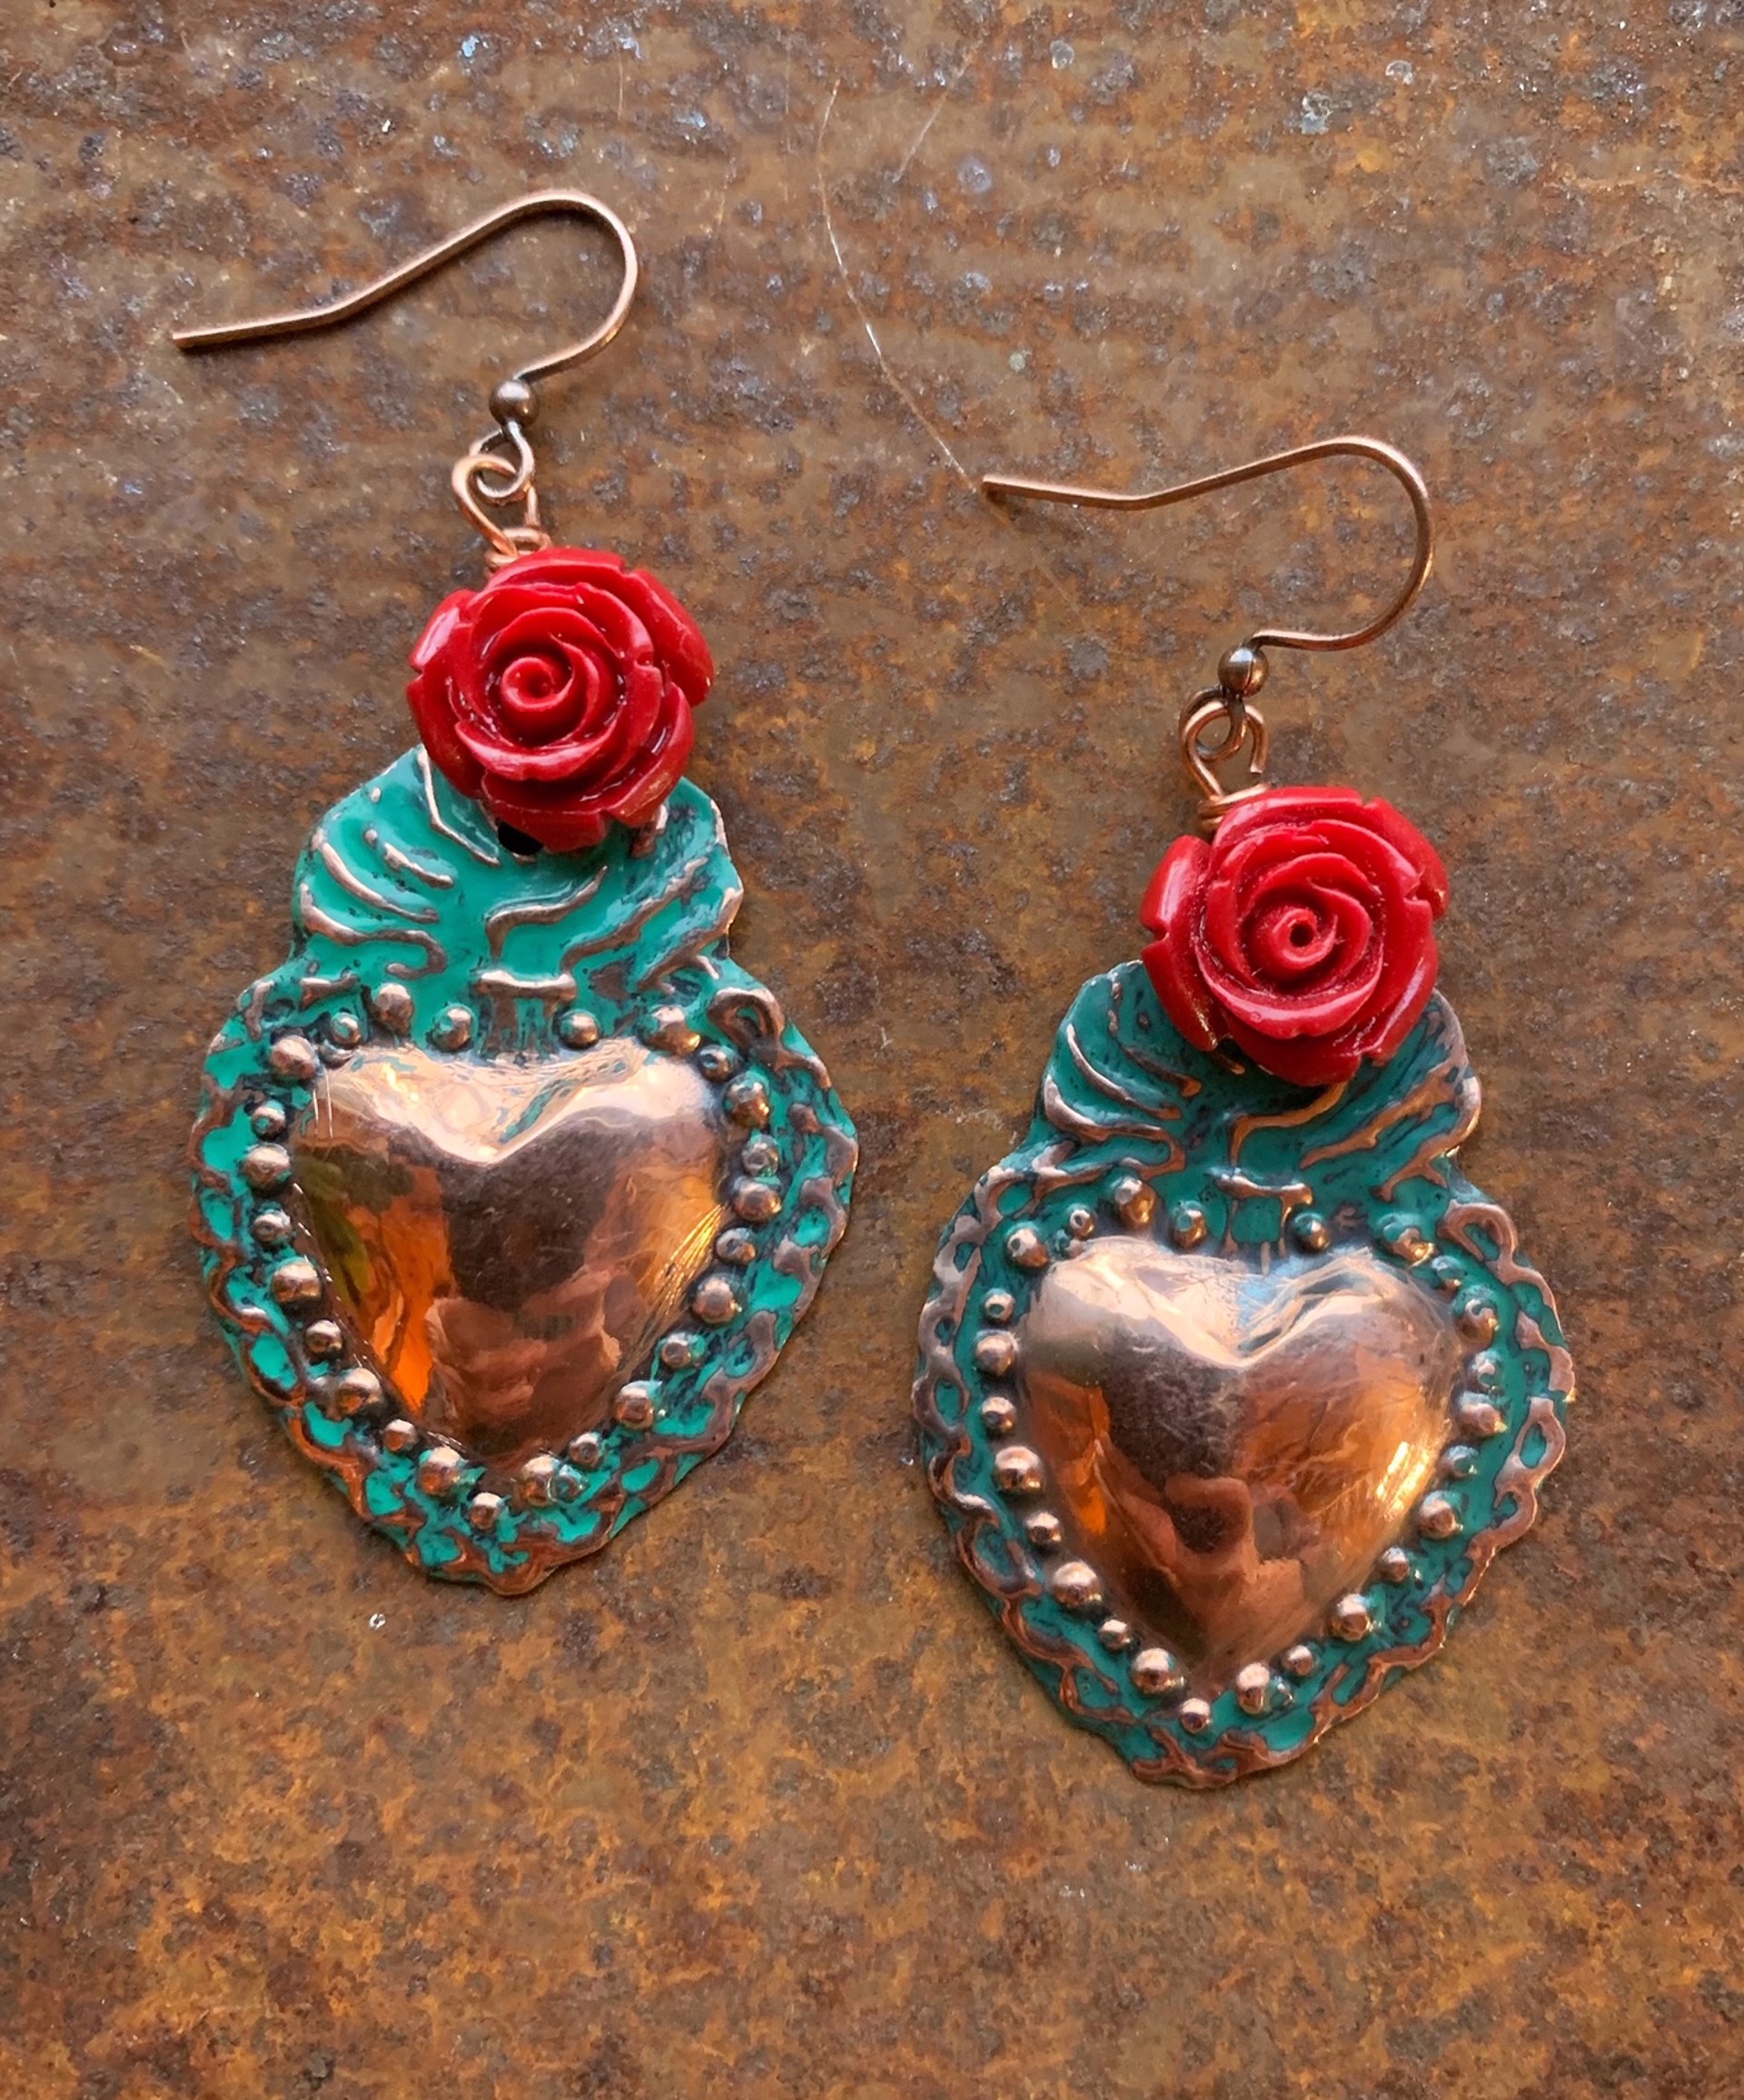 K798 Sacred Heart Earrings with Red Roses by Kelly Ormsby